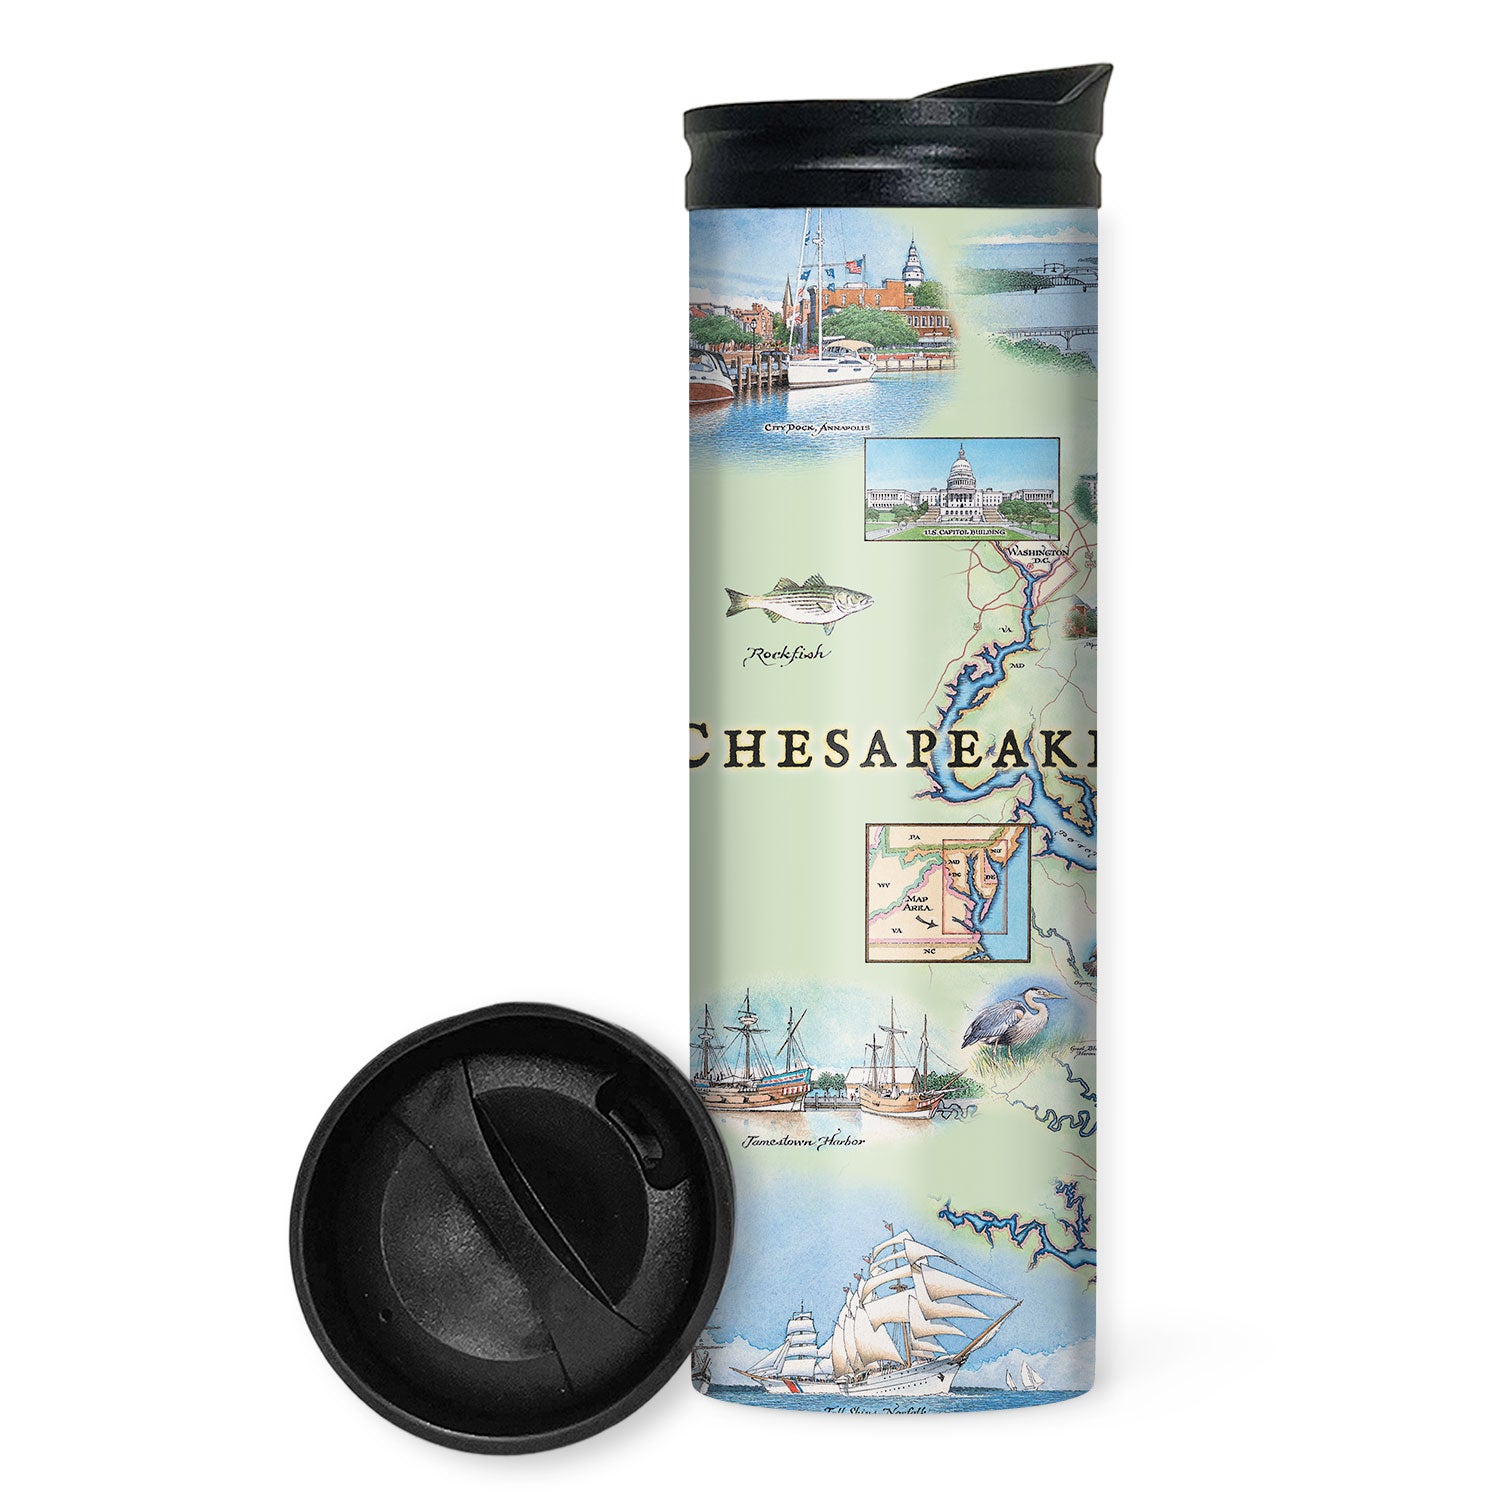 Chesapeake Bay Map travel drinkware by Xplorer Maps featuring illustrations of boat craft and marine life. Places on the map include Baltimore, Annapolis, Cambridge, Yorktown, and the Chesapeake Bay Bridge.